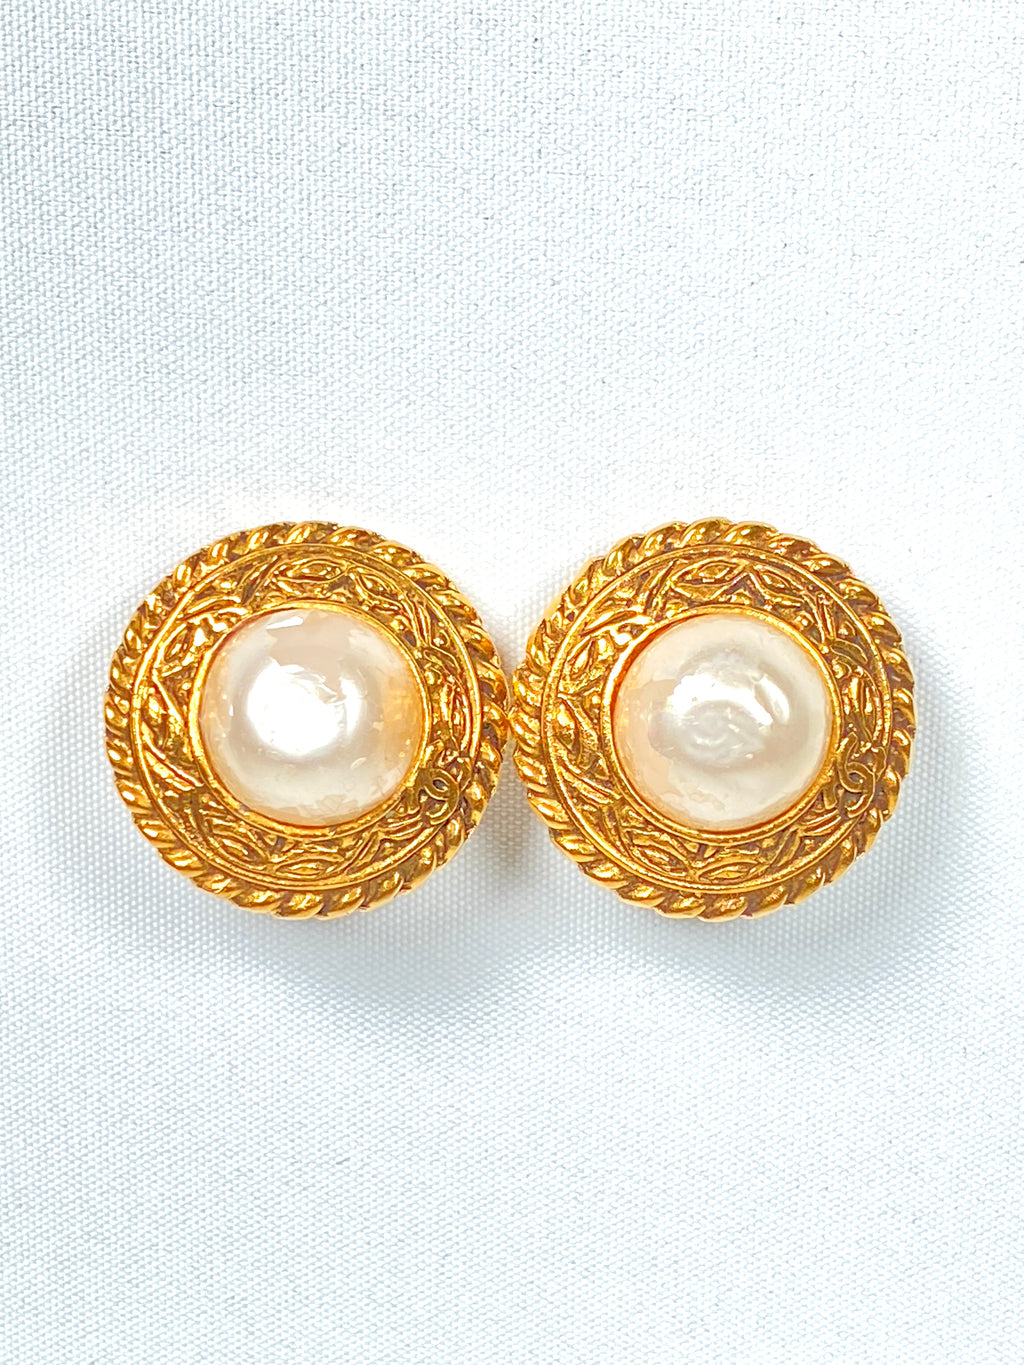 CHANEL - FAUX PEARL AND GOLD ROUND CLIP ON EARRINGS - VINTAGE